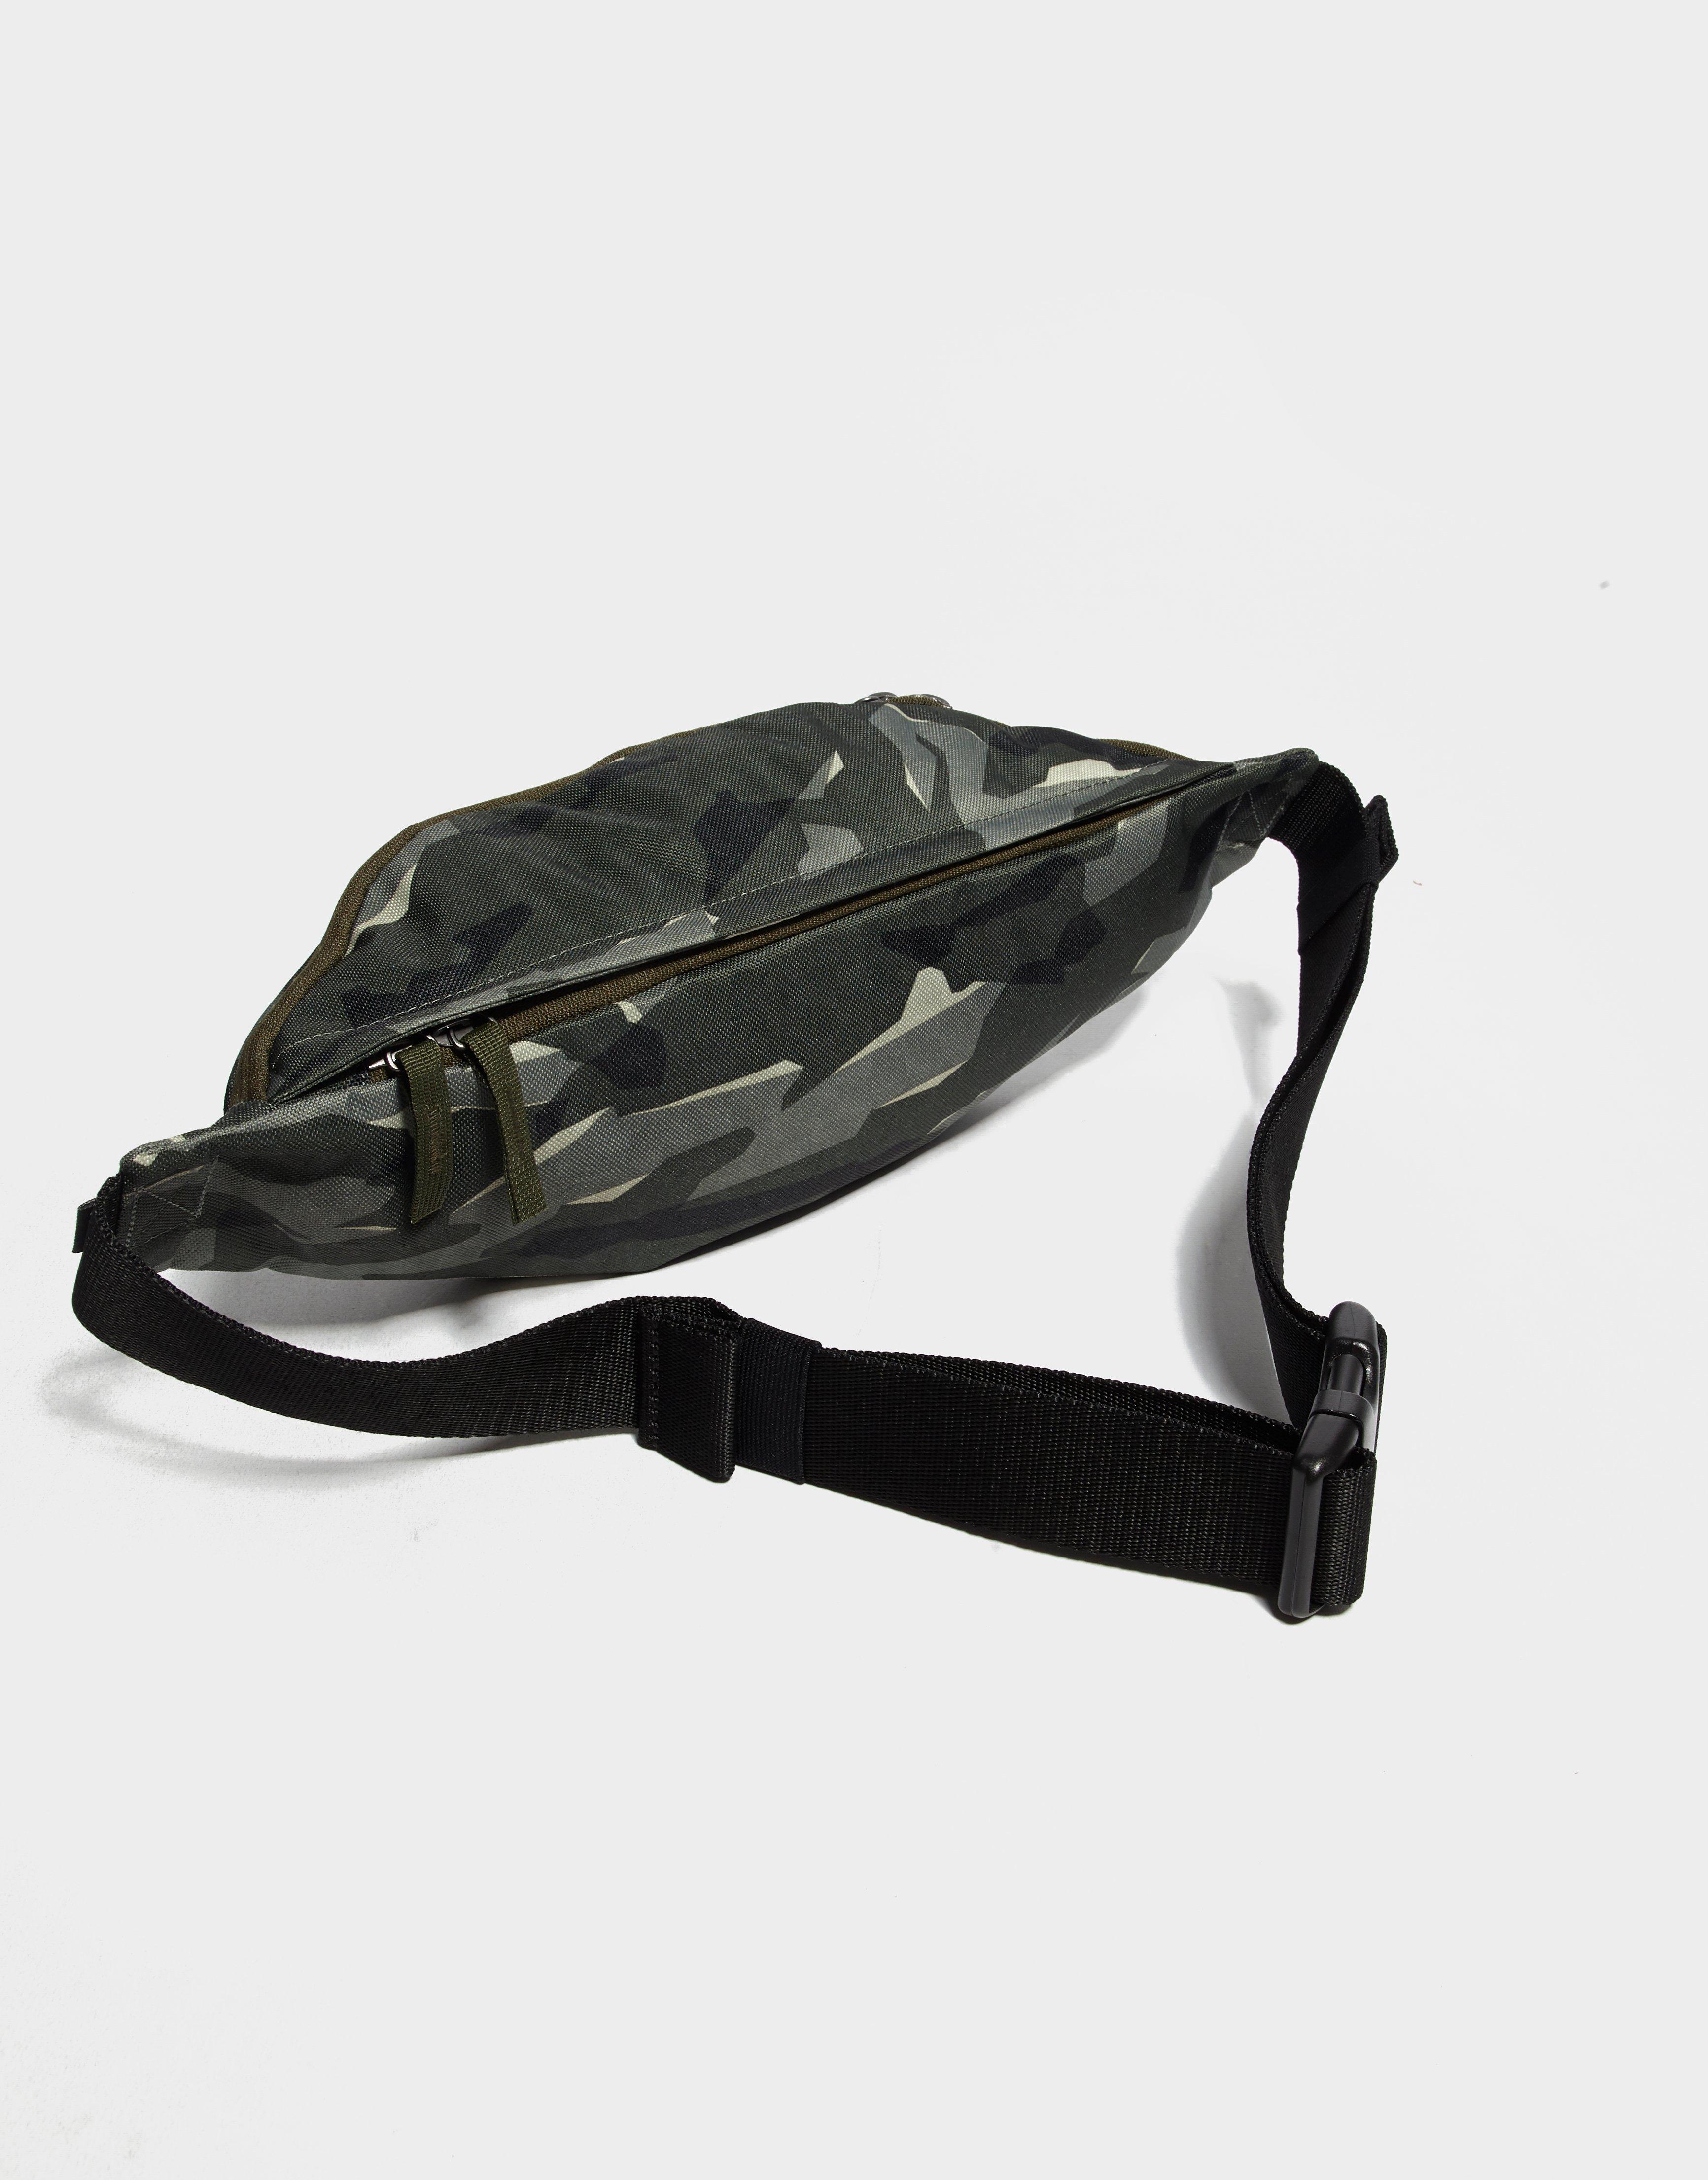 Nike Synthetic Camo Waist Bag in Green/Camo (Green) for Men - Lyst